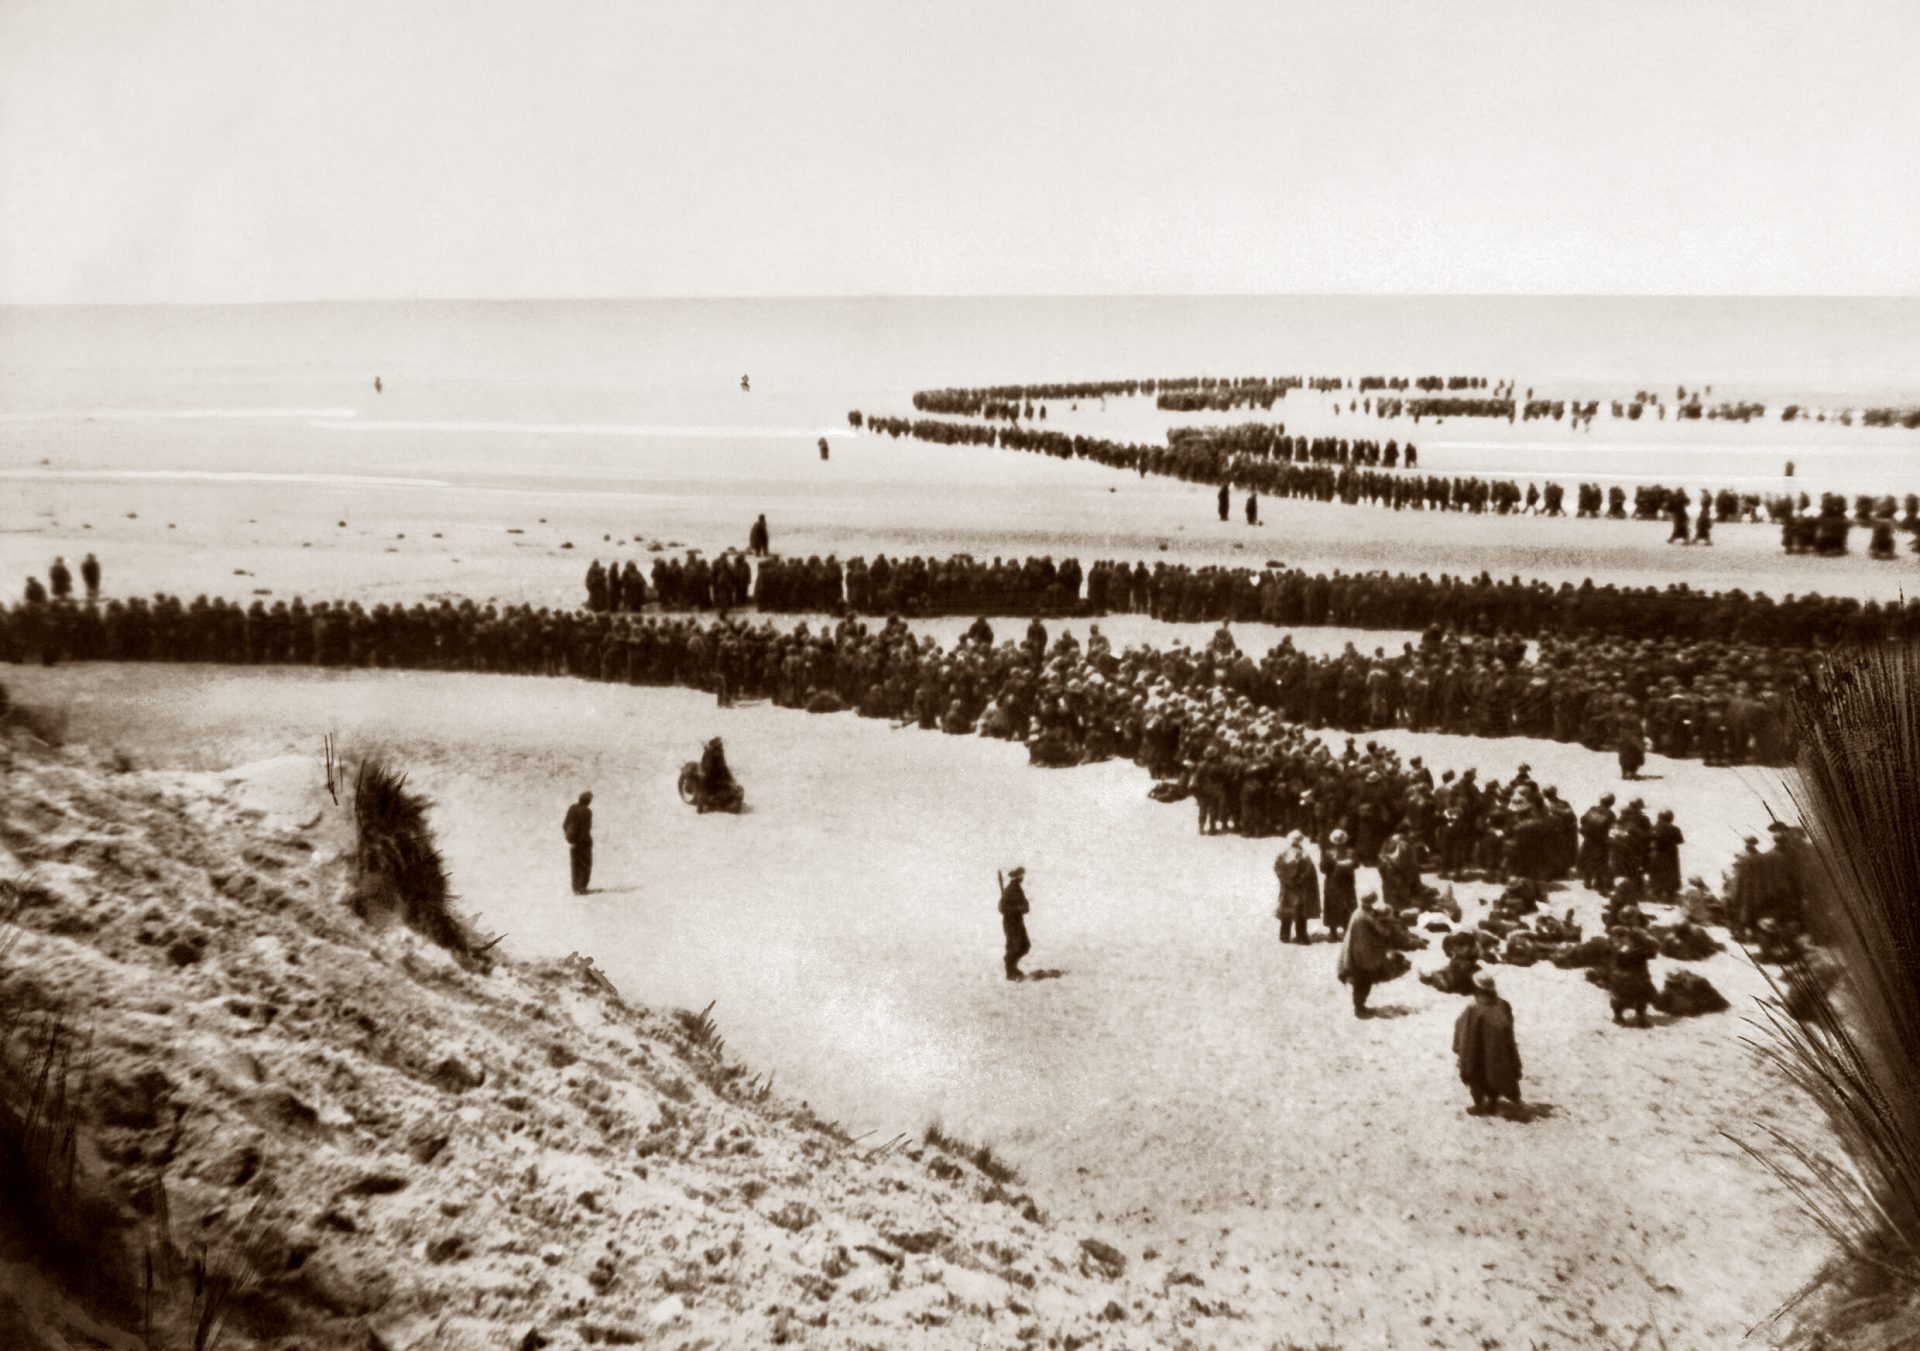 Historical black and white photo showing British troops in long, orderly lines on the sands of Dunkirk beach, waiting for evacuation between 26-29 May 1940. Some soldiers are seated on the ground, while others stand in formations, with the vast, open beach and horizon in the background. The scene is calm, despite the urgent circumstances.